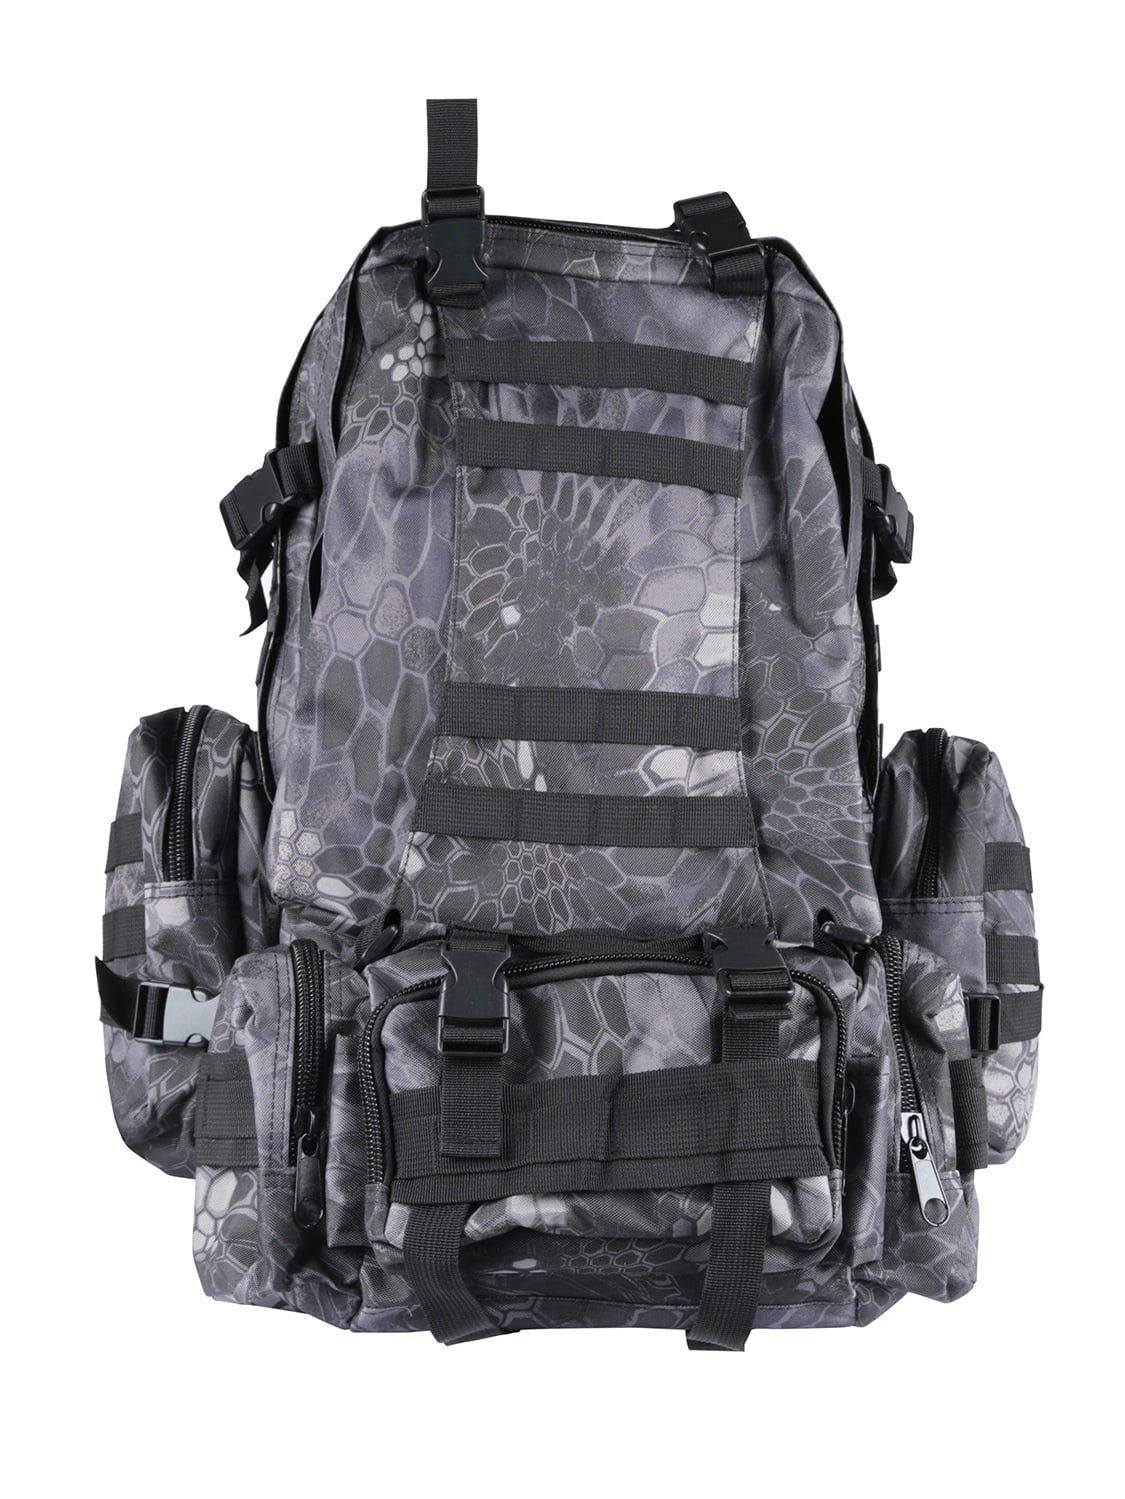 4-in-1 Outdoor Tactical Backpack for Camping Hiking Trekking - Black Python